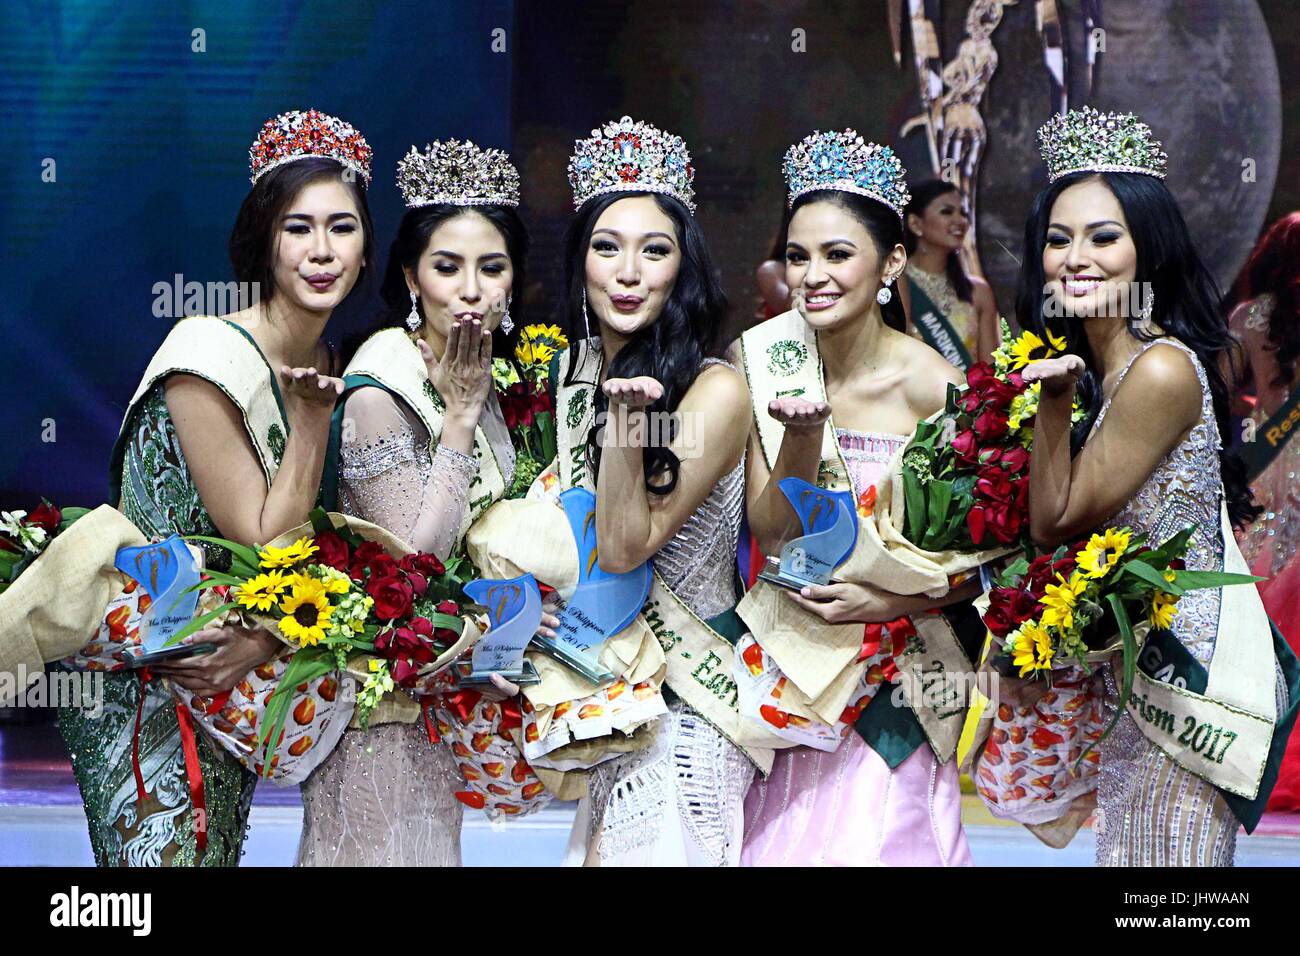 From left to tight: Ms. Philippines Fire 2017 Neliza Bautista (Villanueva, Misamis Oriental), Ms. Philippines Air 2017 Kim De Guzman (Olongapo City), Ms. Philippines Earth 2017 Karen Ibasco (Manila City), Ms. Philippines Water 2017 Jessica Marasigan (Caloocan City), and Ms. Philippines Eco-tourism 2017 Vanessa Mae Castillo (Lobo, Batangas) took a striking pose during the Miss Earth Philippines coronation night at Mall Of Asia (MOA) Arena in Pasay City on July 15, 2017. It's a total of 40 candidates participated in The Miss Earth Philippines 2017. (Photo by Gregorio B. Dantes Jr./Pacific Press) Stock Photo